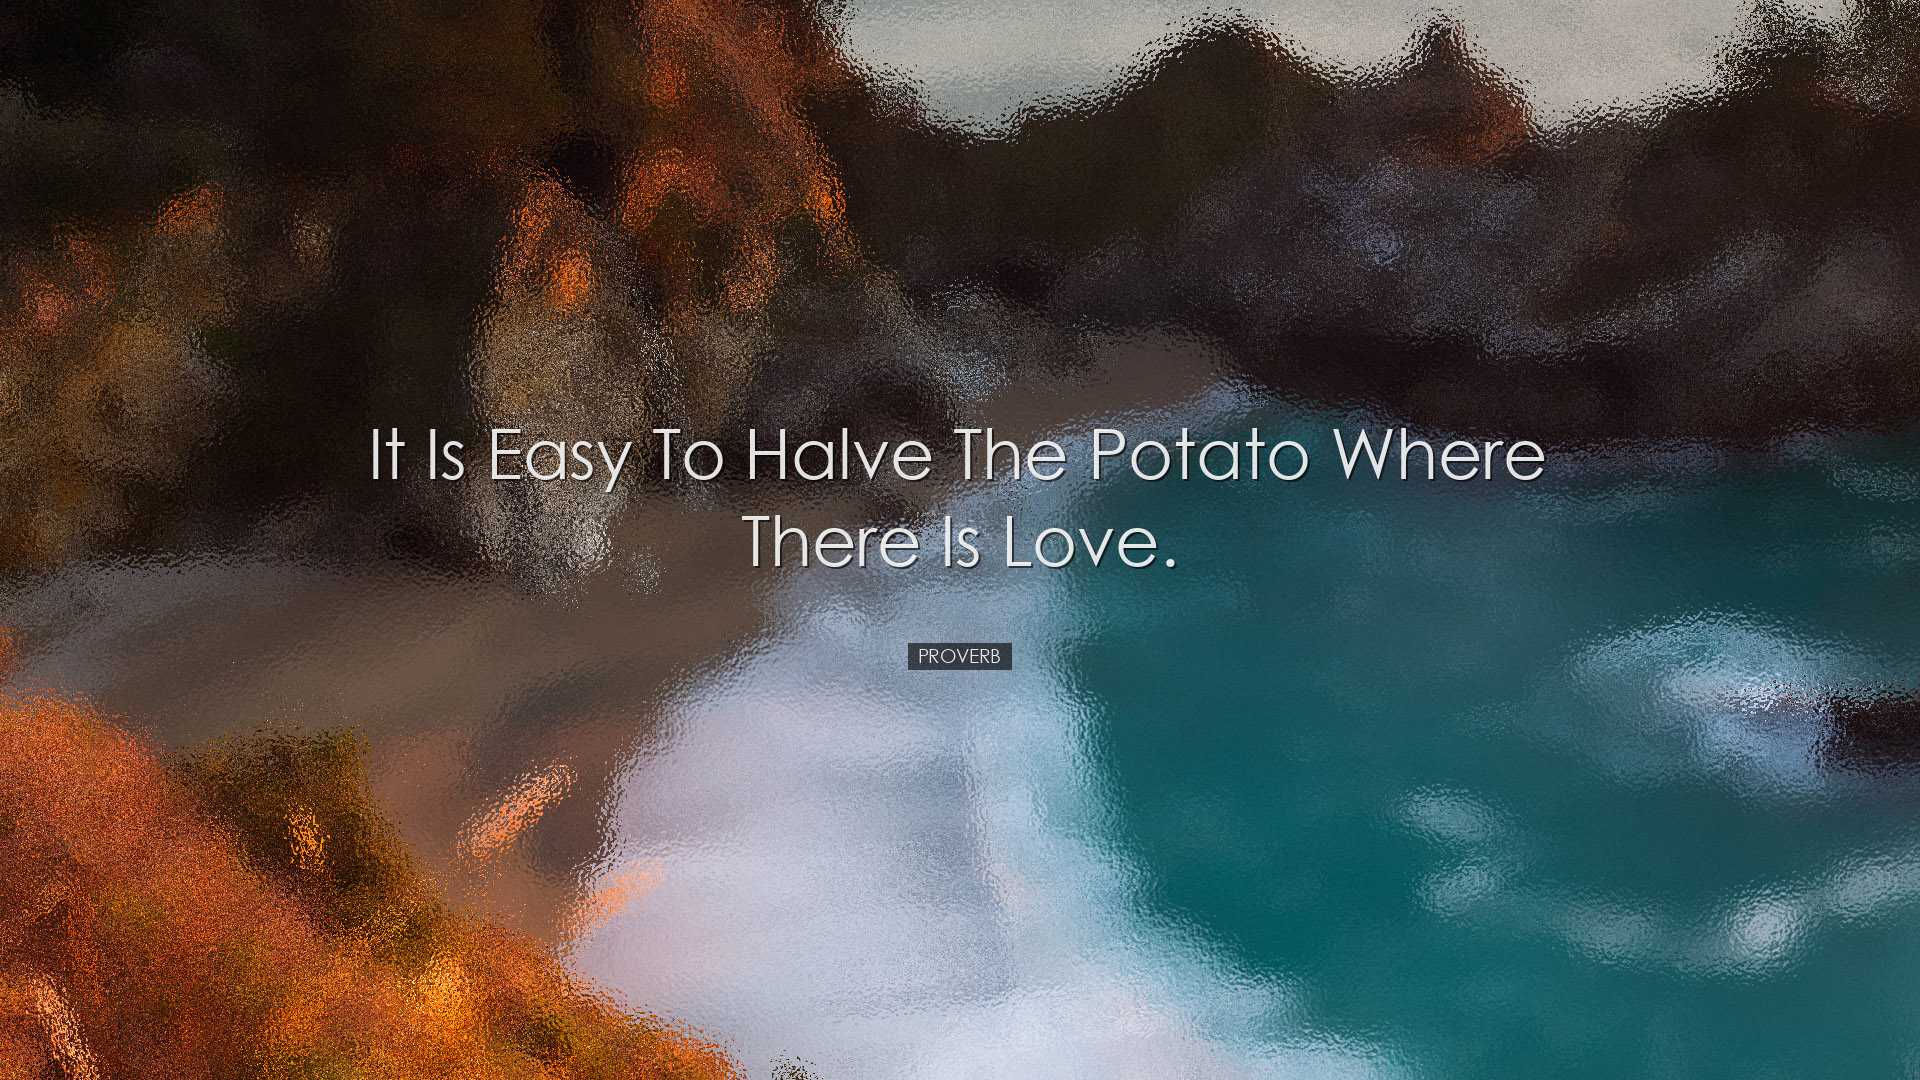 It is easy to halve the potato where there is love. - Proverb